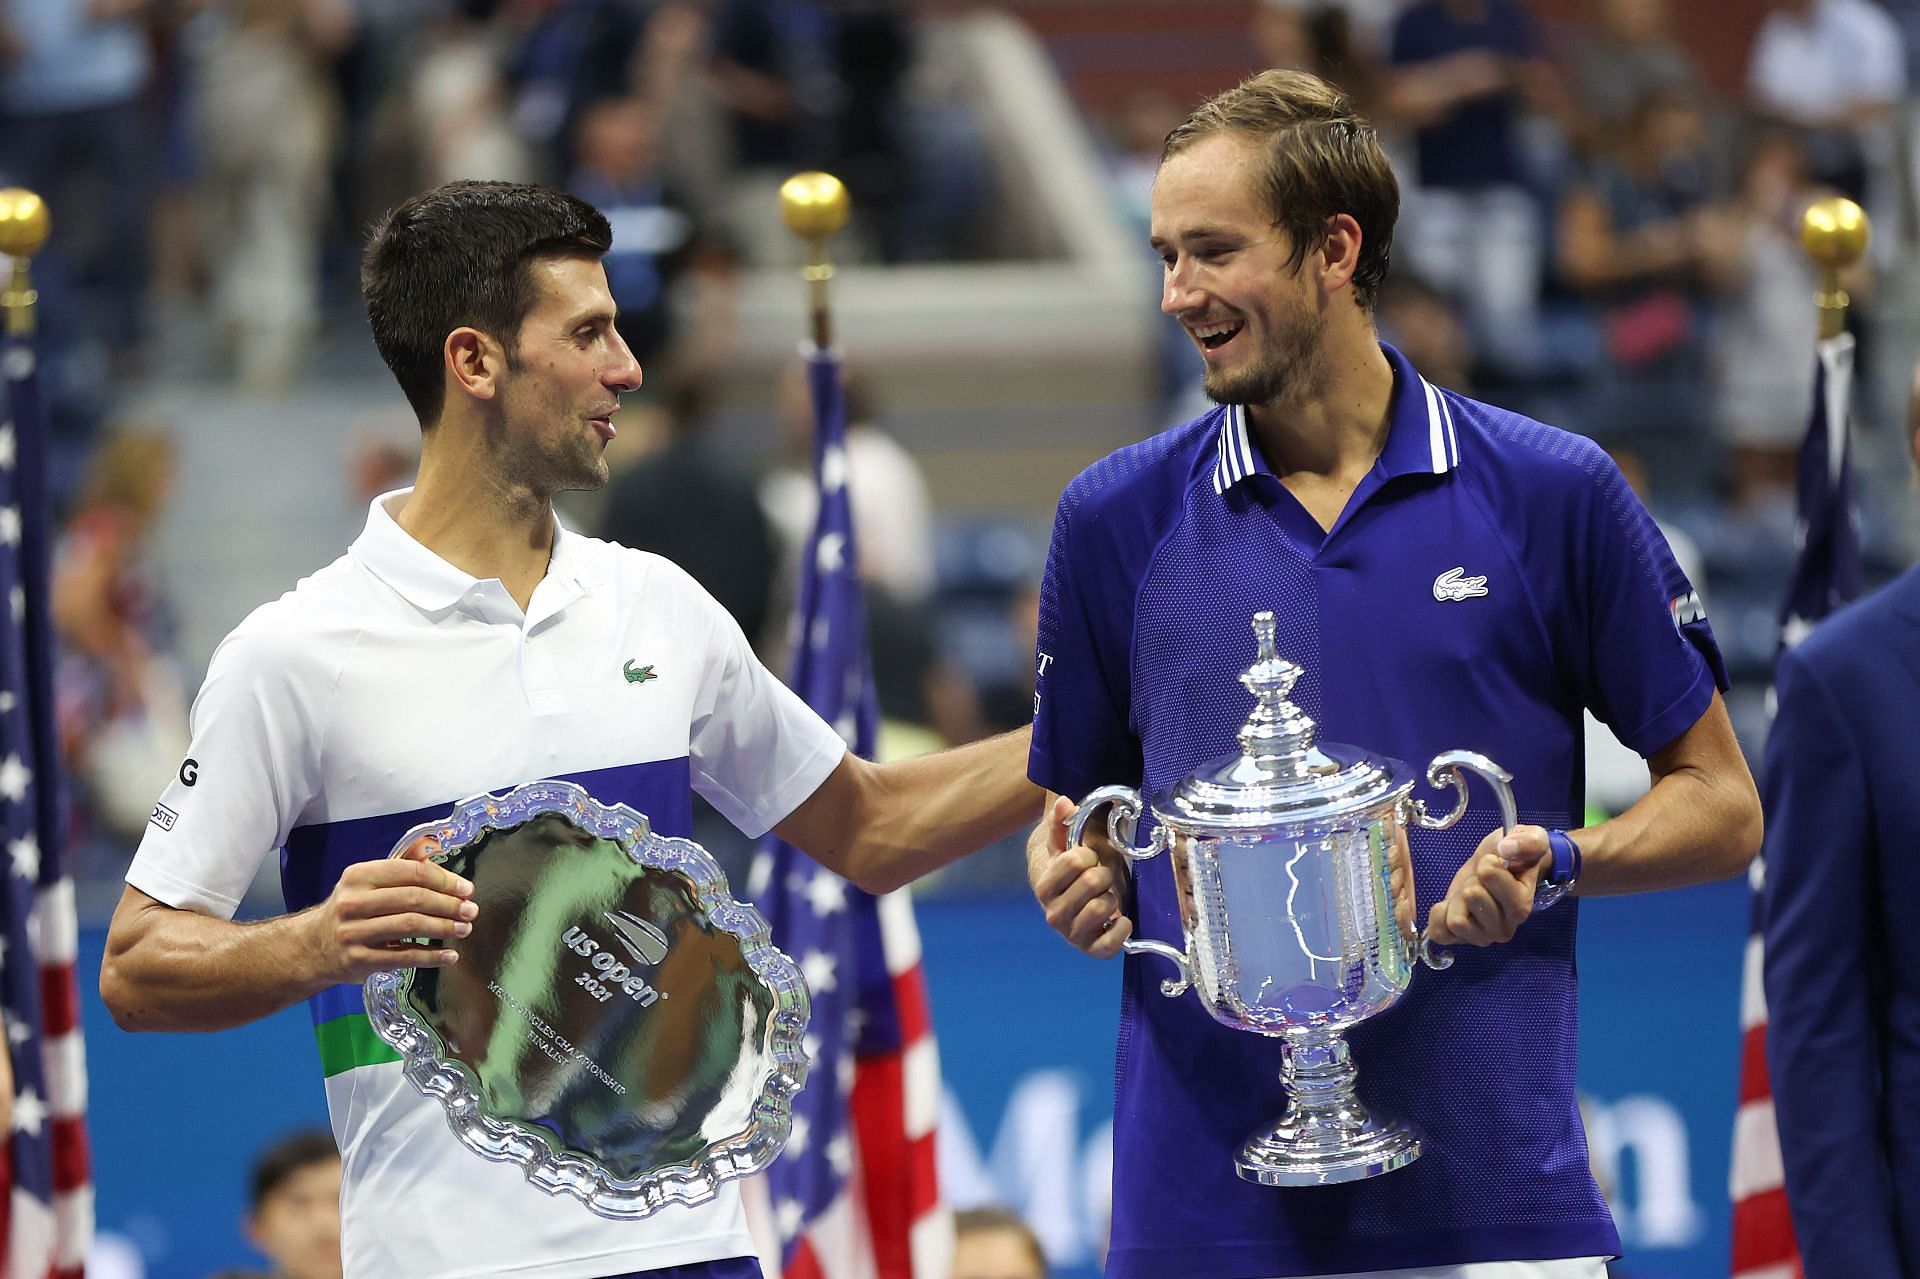 Novak Djokovic and Daniil Medvedev at the presentaion ceremony following the US Open final